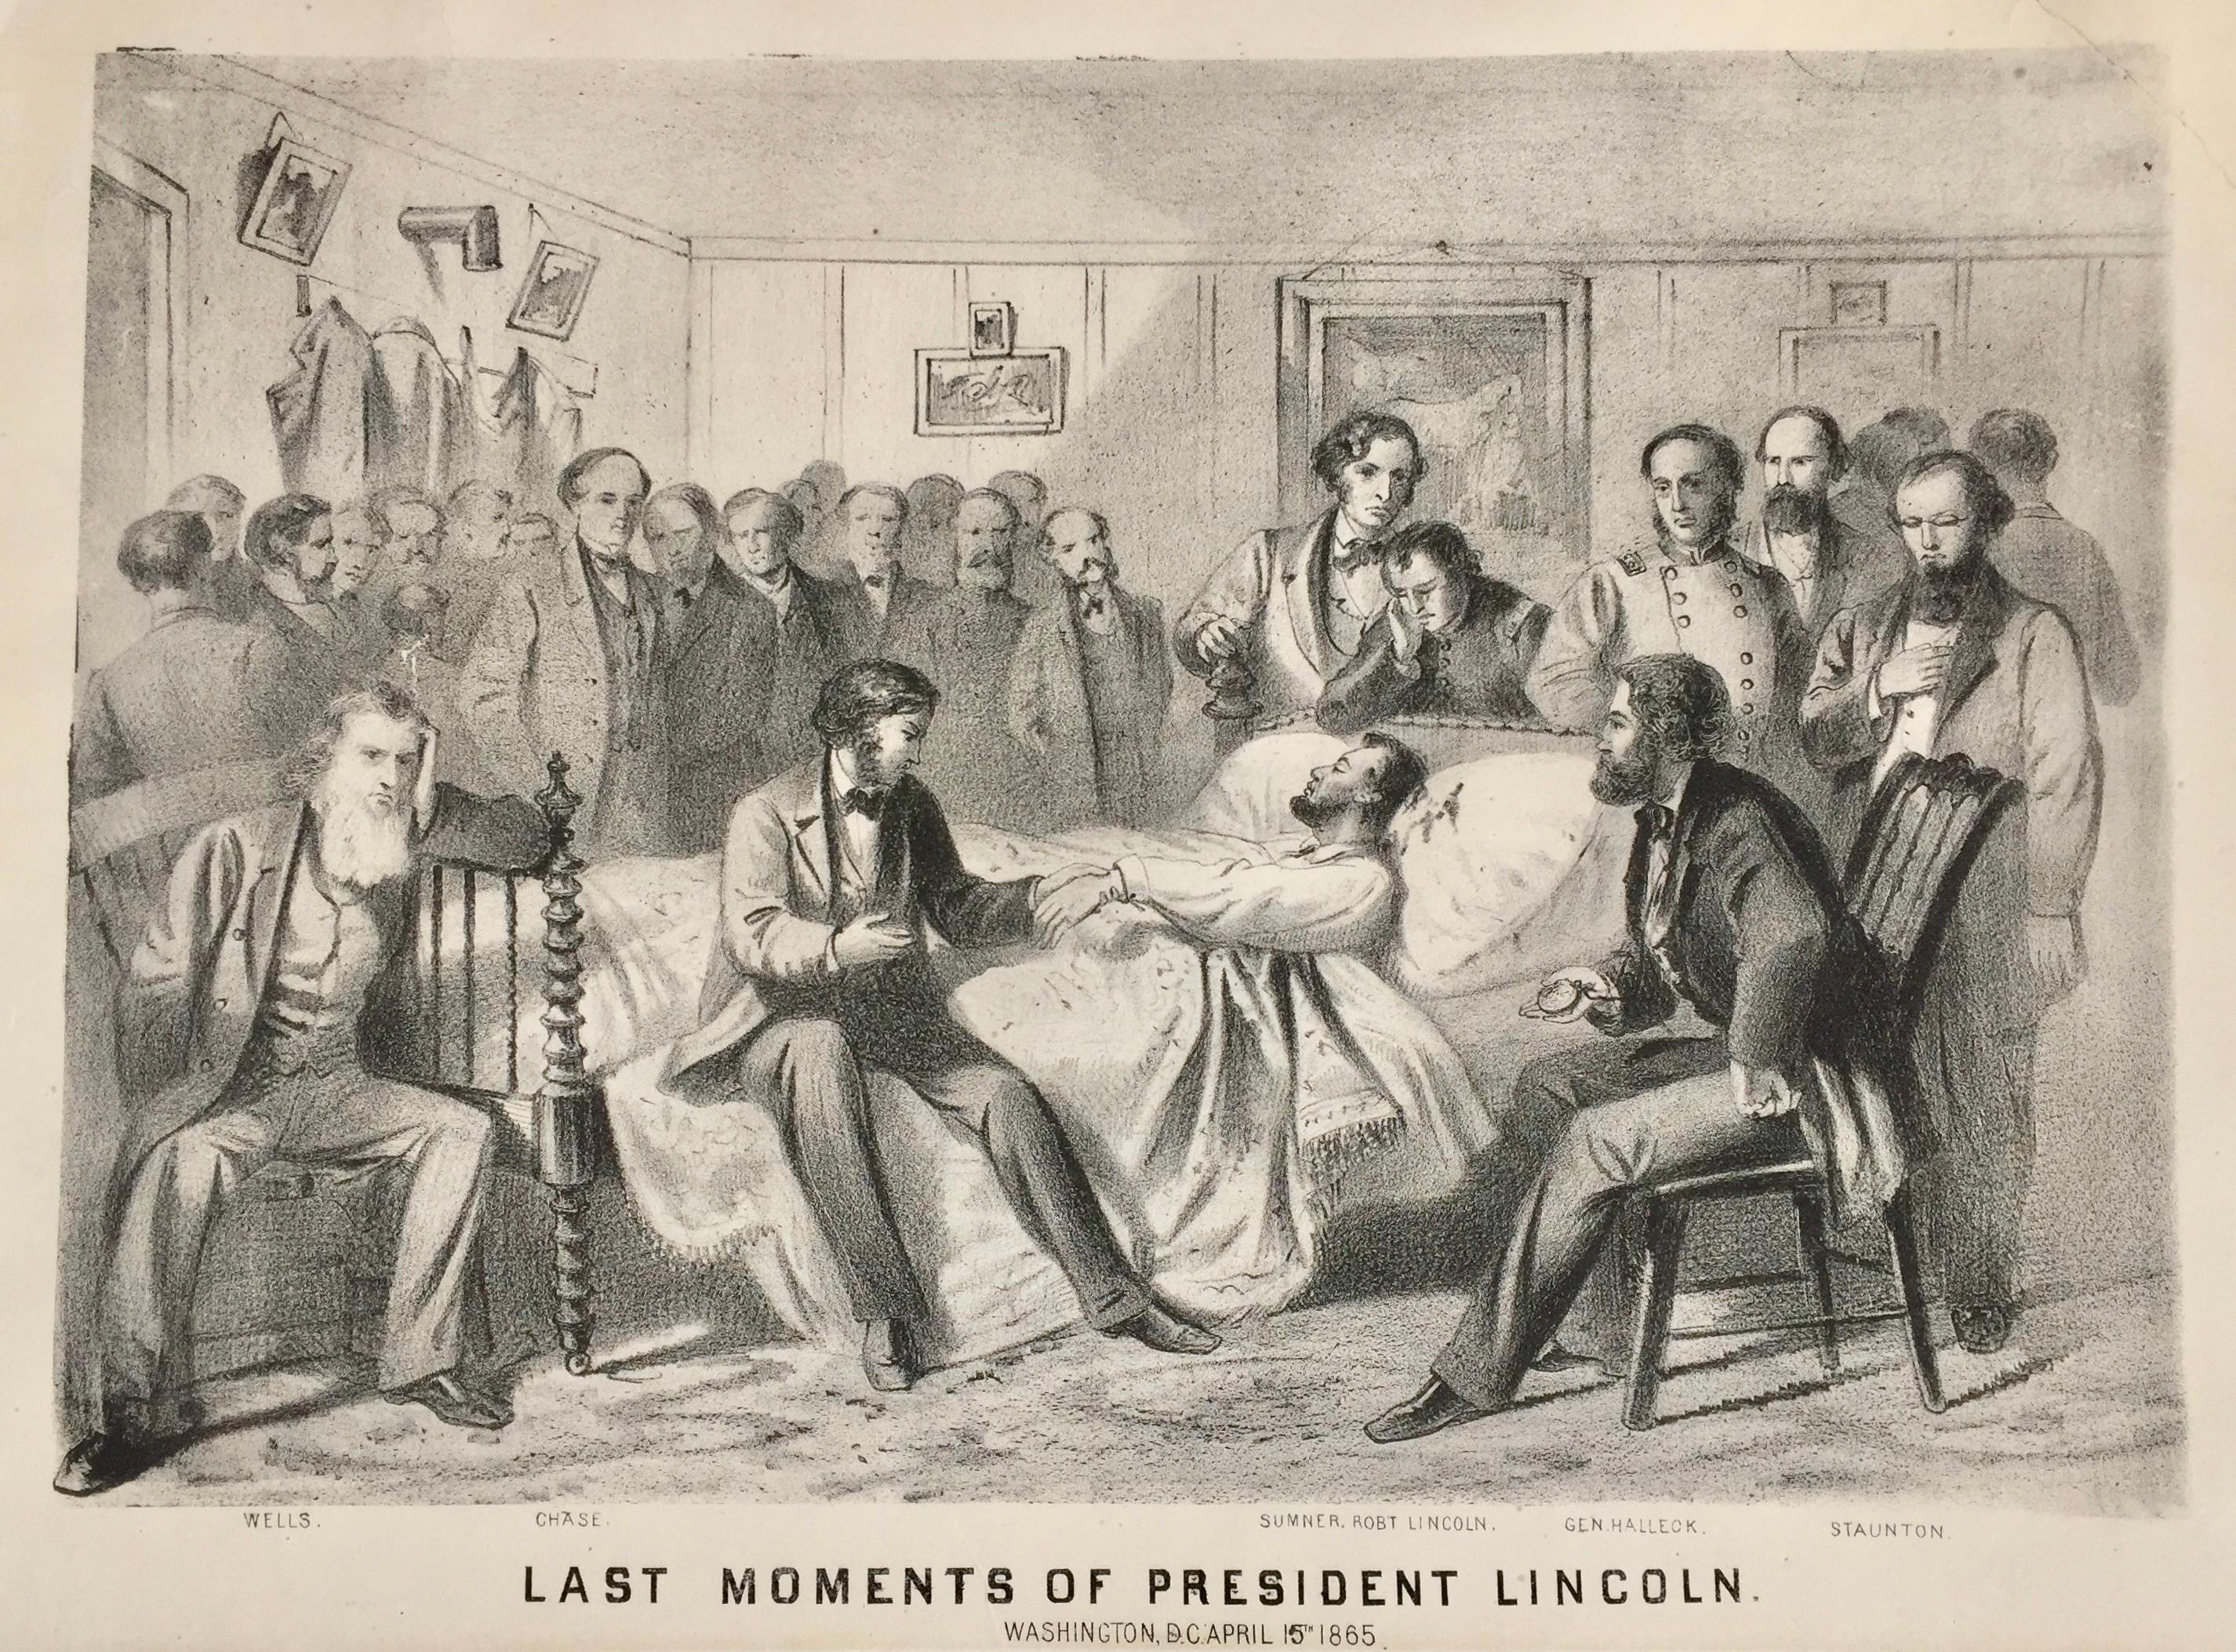 LAST MOMENTS OF PRESIDENT LINCOLN